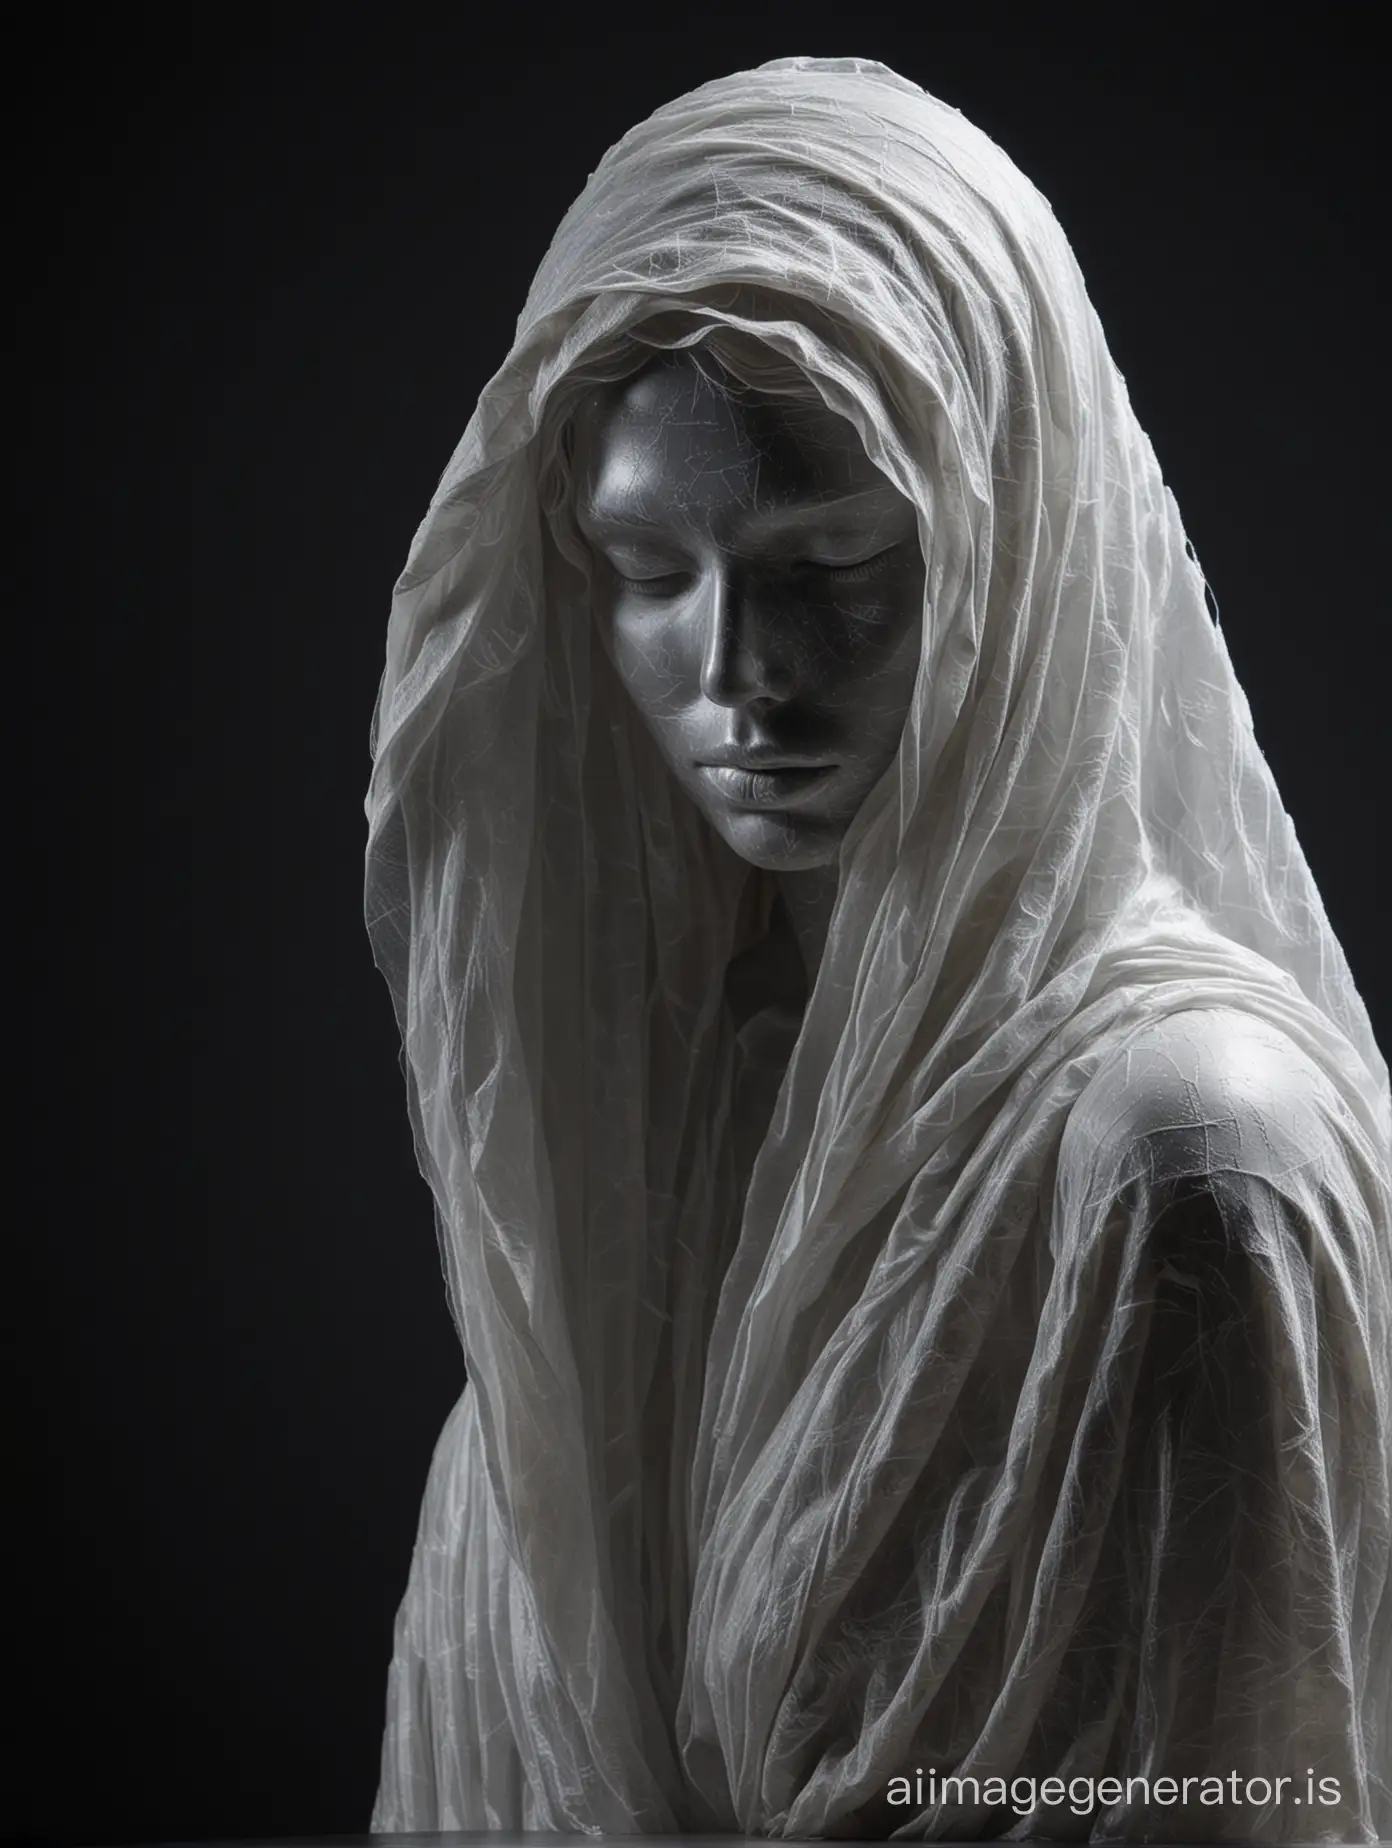 sculpture of a woman made of marble, a transparent fabric covers her face on a dark background, looks aloof, thoughtfully, sadly